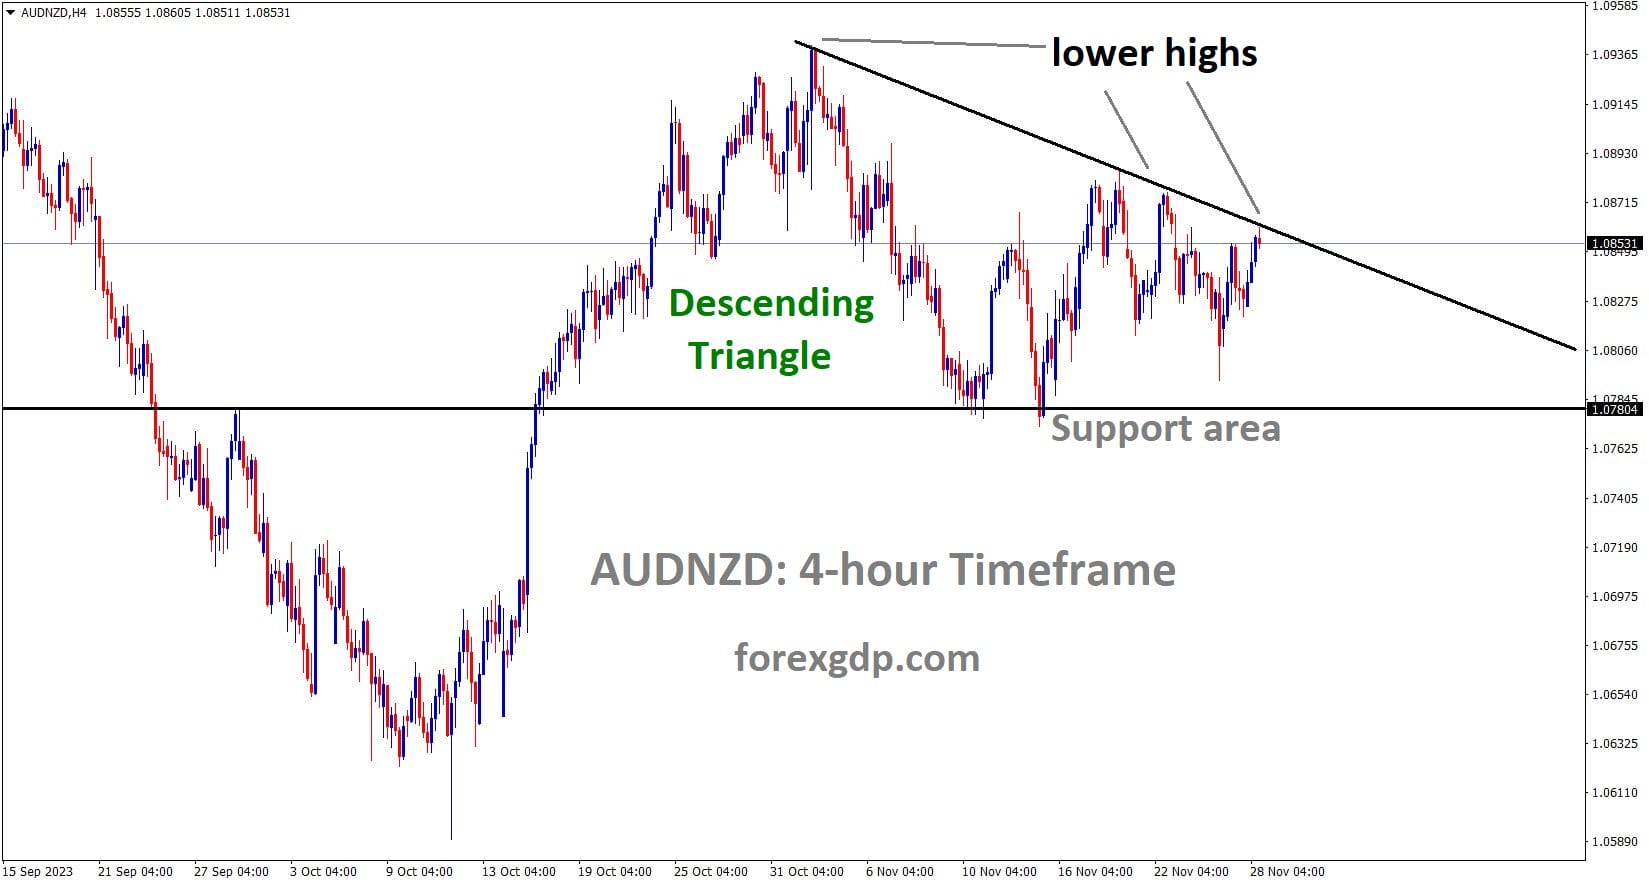 AUDNZD H4 TF Analysis Market is moving in the Descending triangle pattern and the market has reached the lower high area of the pattern